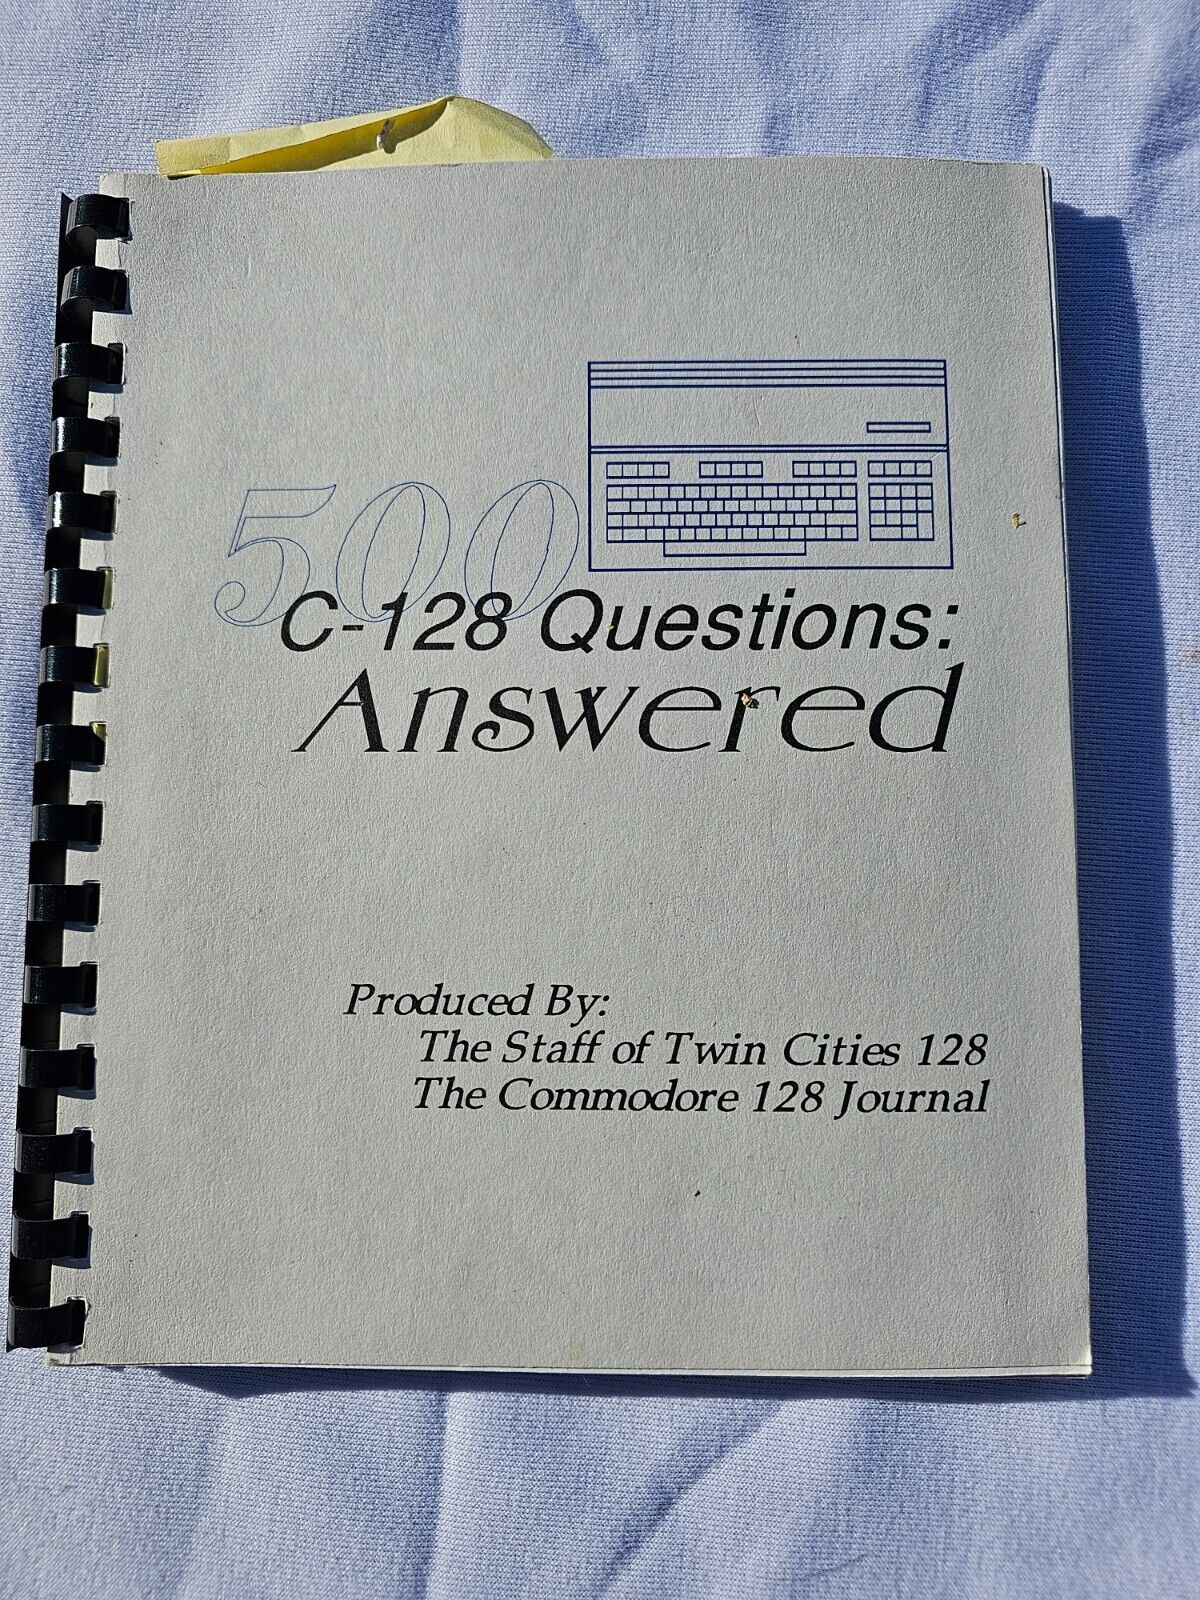 500 C-128 Questions: Answered Produced By: The Staff of Twin Cities 128 The Comm